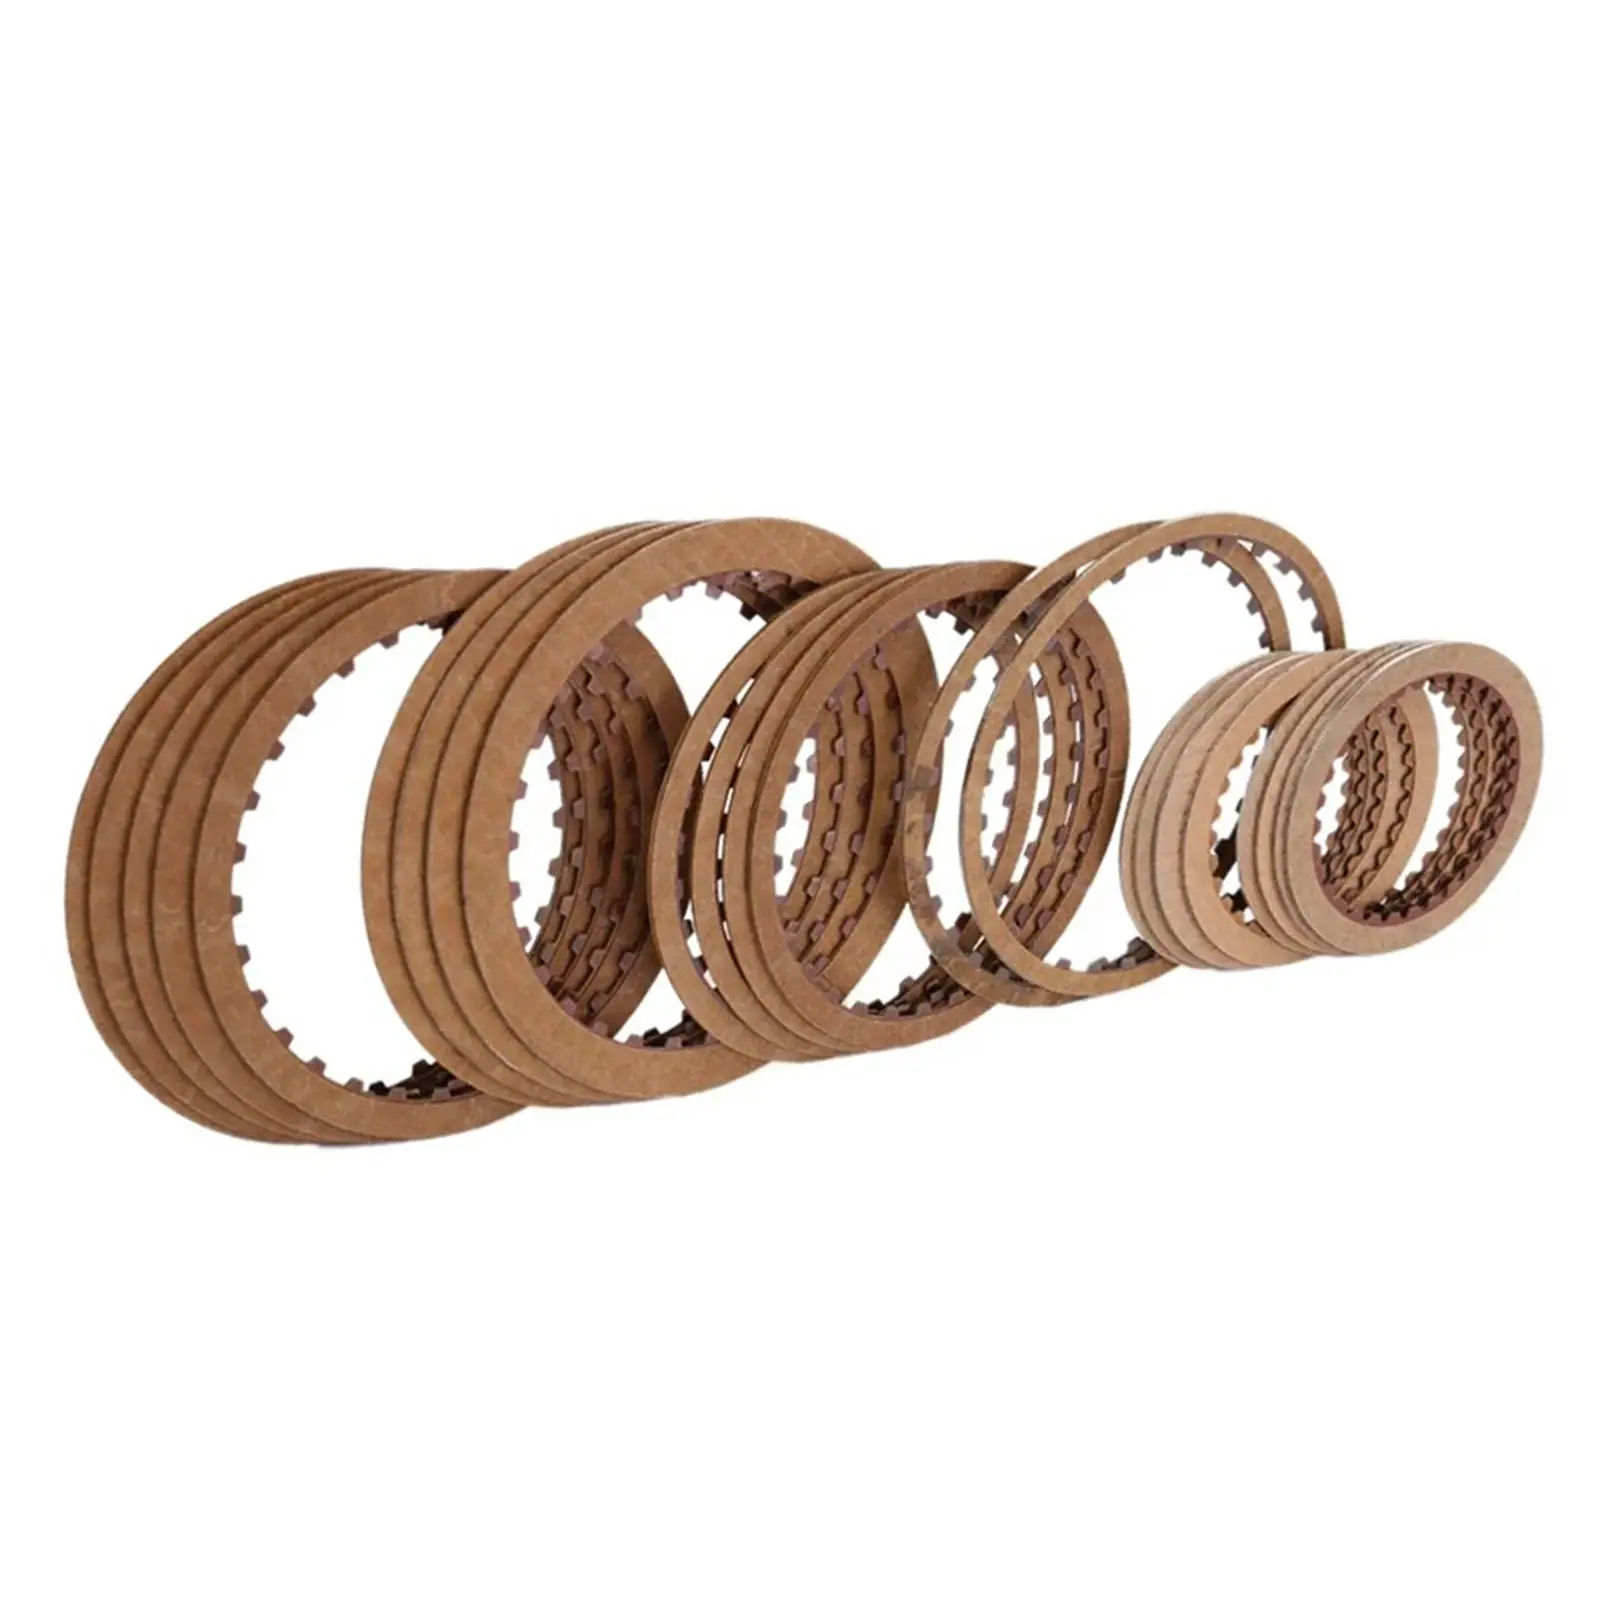 Car Transmission Clutch Plate Kit Portable Replacement Durable Gearbox Friction Plates for Toyota Vios 2004-On U540E U541E